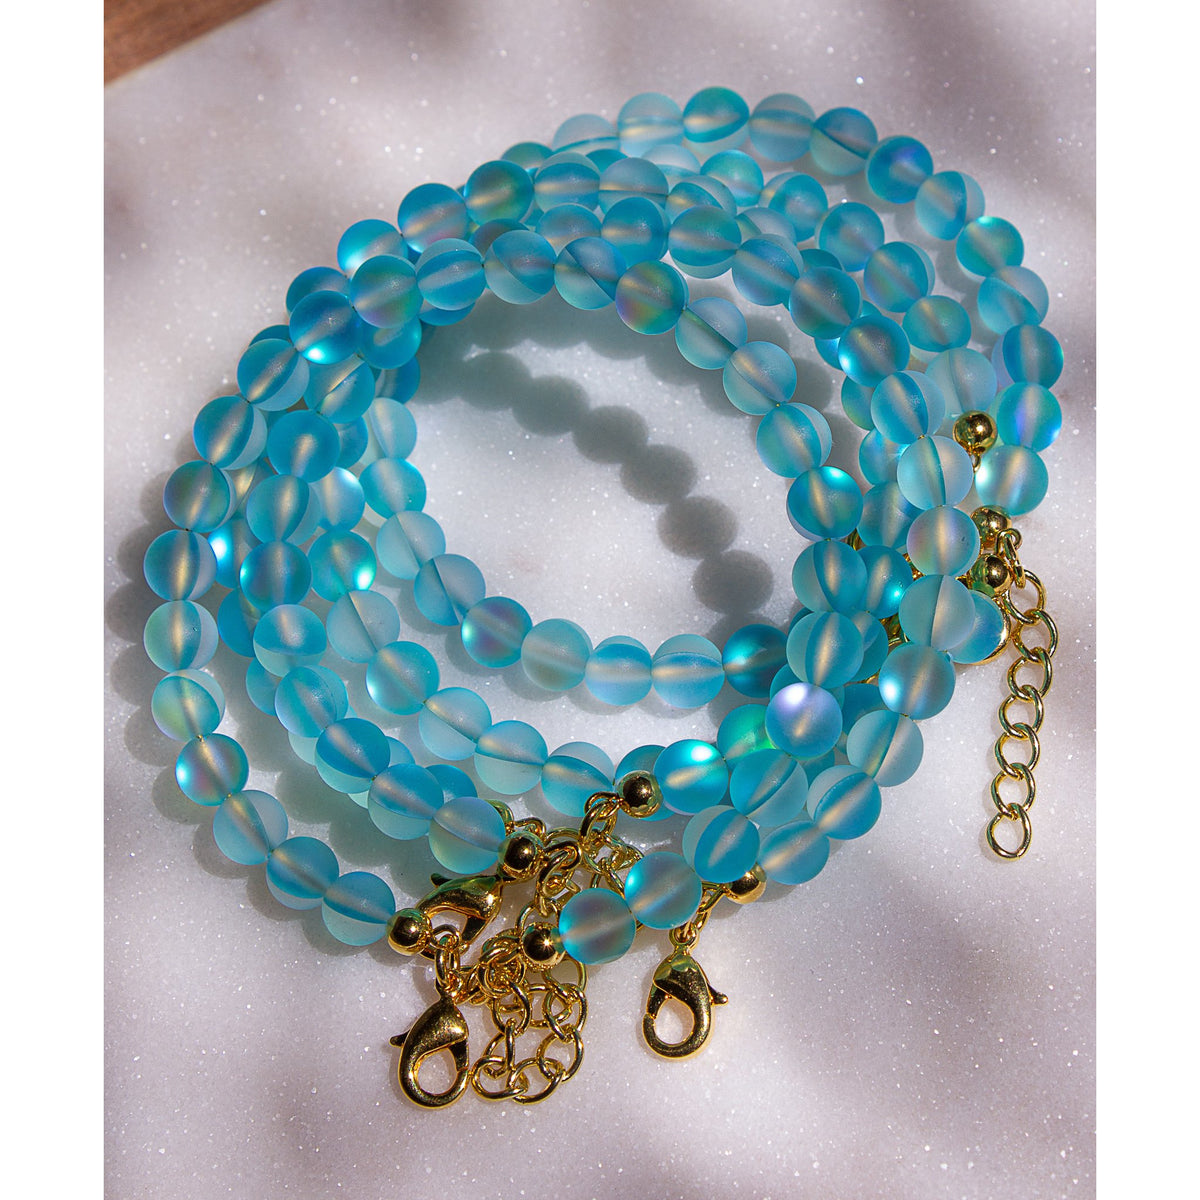 MOON TIDAL BRACELET - RECYCLED GLASS BEADS - 2 SIZES